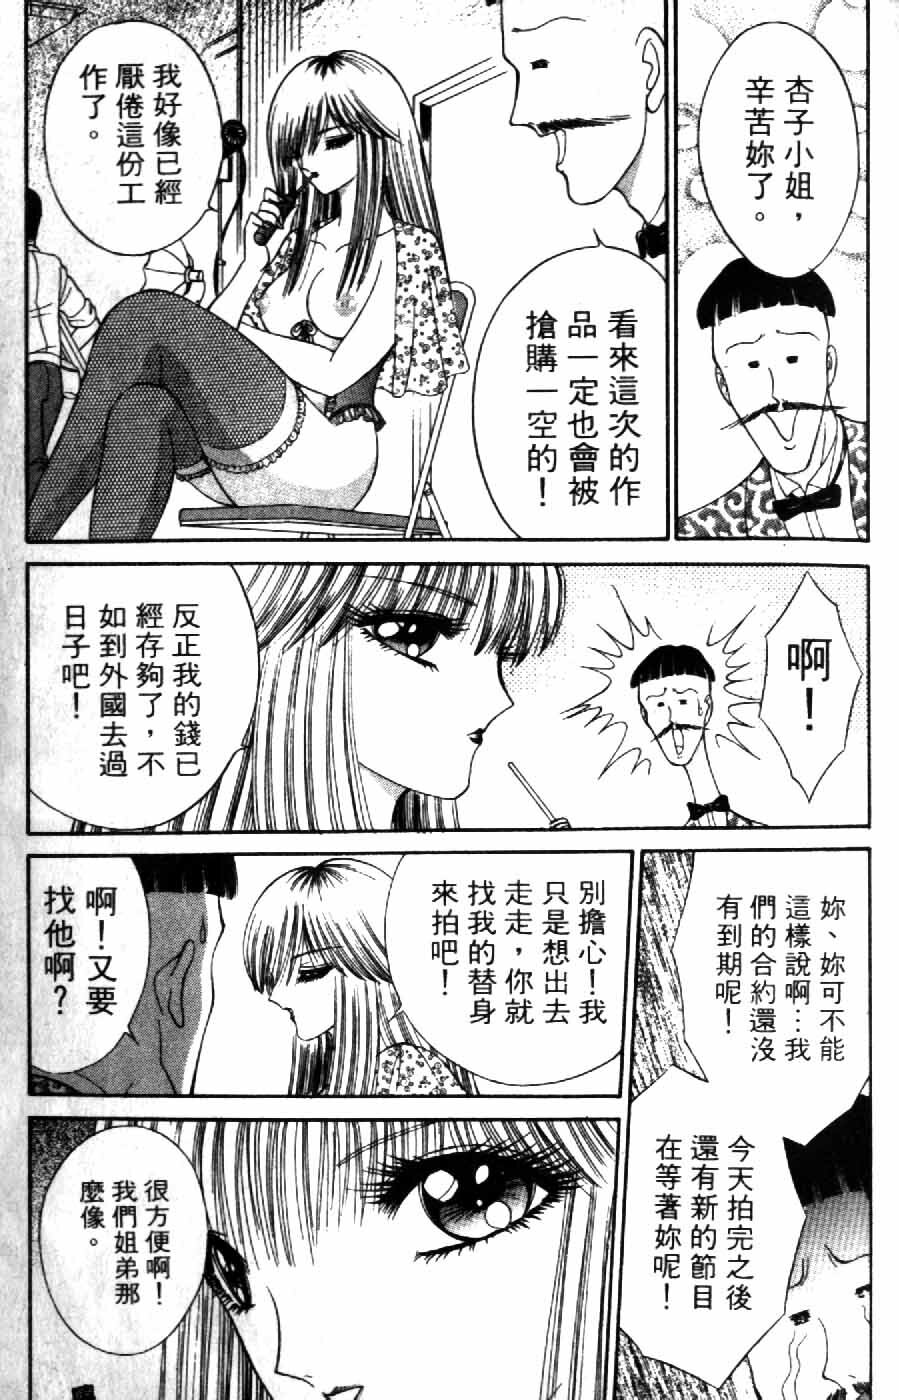 [Senno Knife] Ouma ga Horror Show 2 - Trans Sexual Special Show 2 | 顫慄博覽會 2 [Chinese] page 47 full